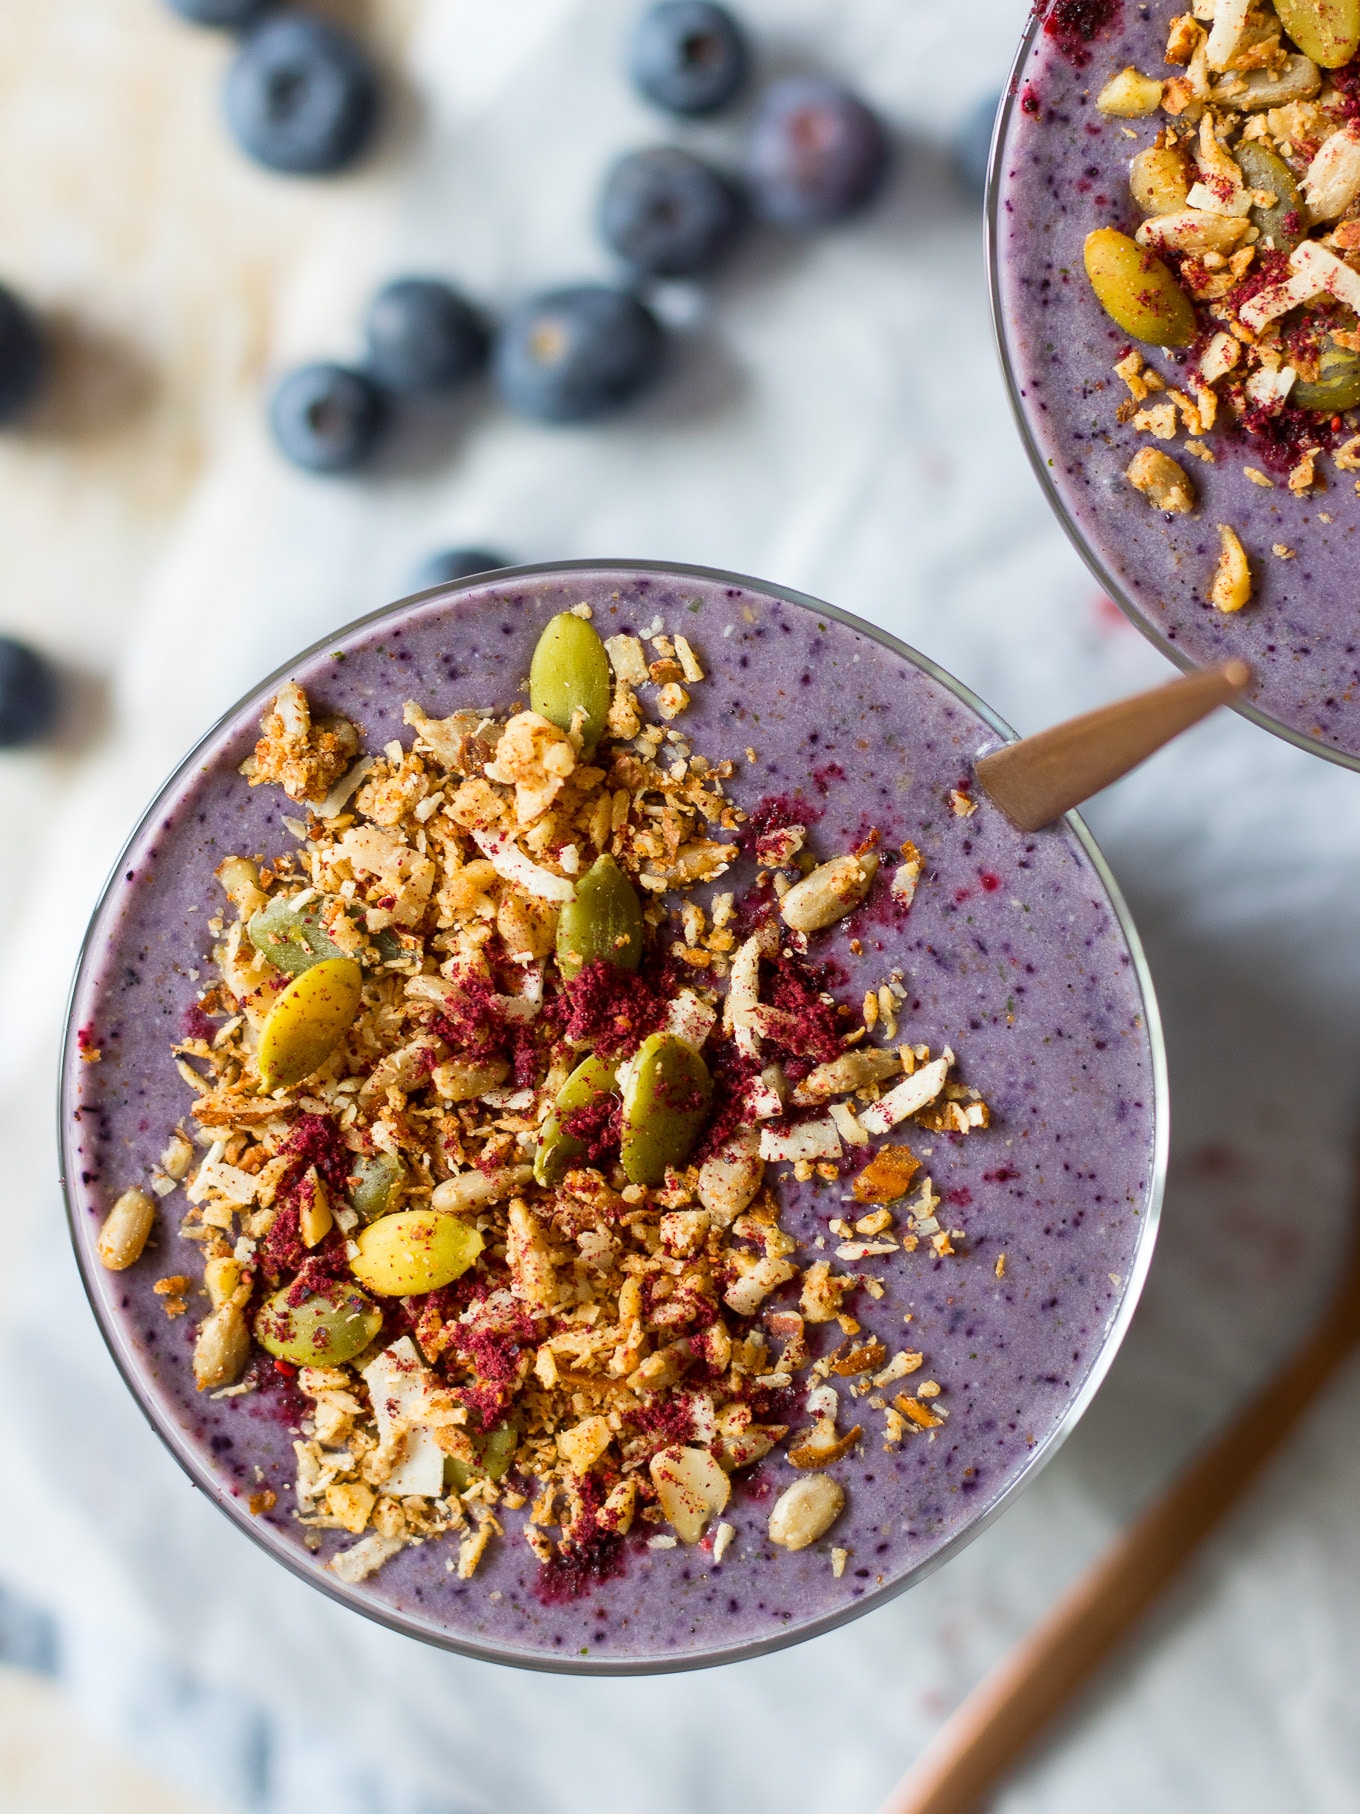 Blueberry Zucchini Protein Smoothie - made using frozen zucchini for a creamy but healthy thick smoothie! Gluten free, paleo friendly and with a vegan option too. #breakfastsmoothie #healthysnack #proteinsmoothie